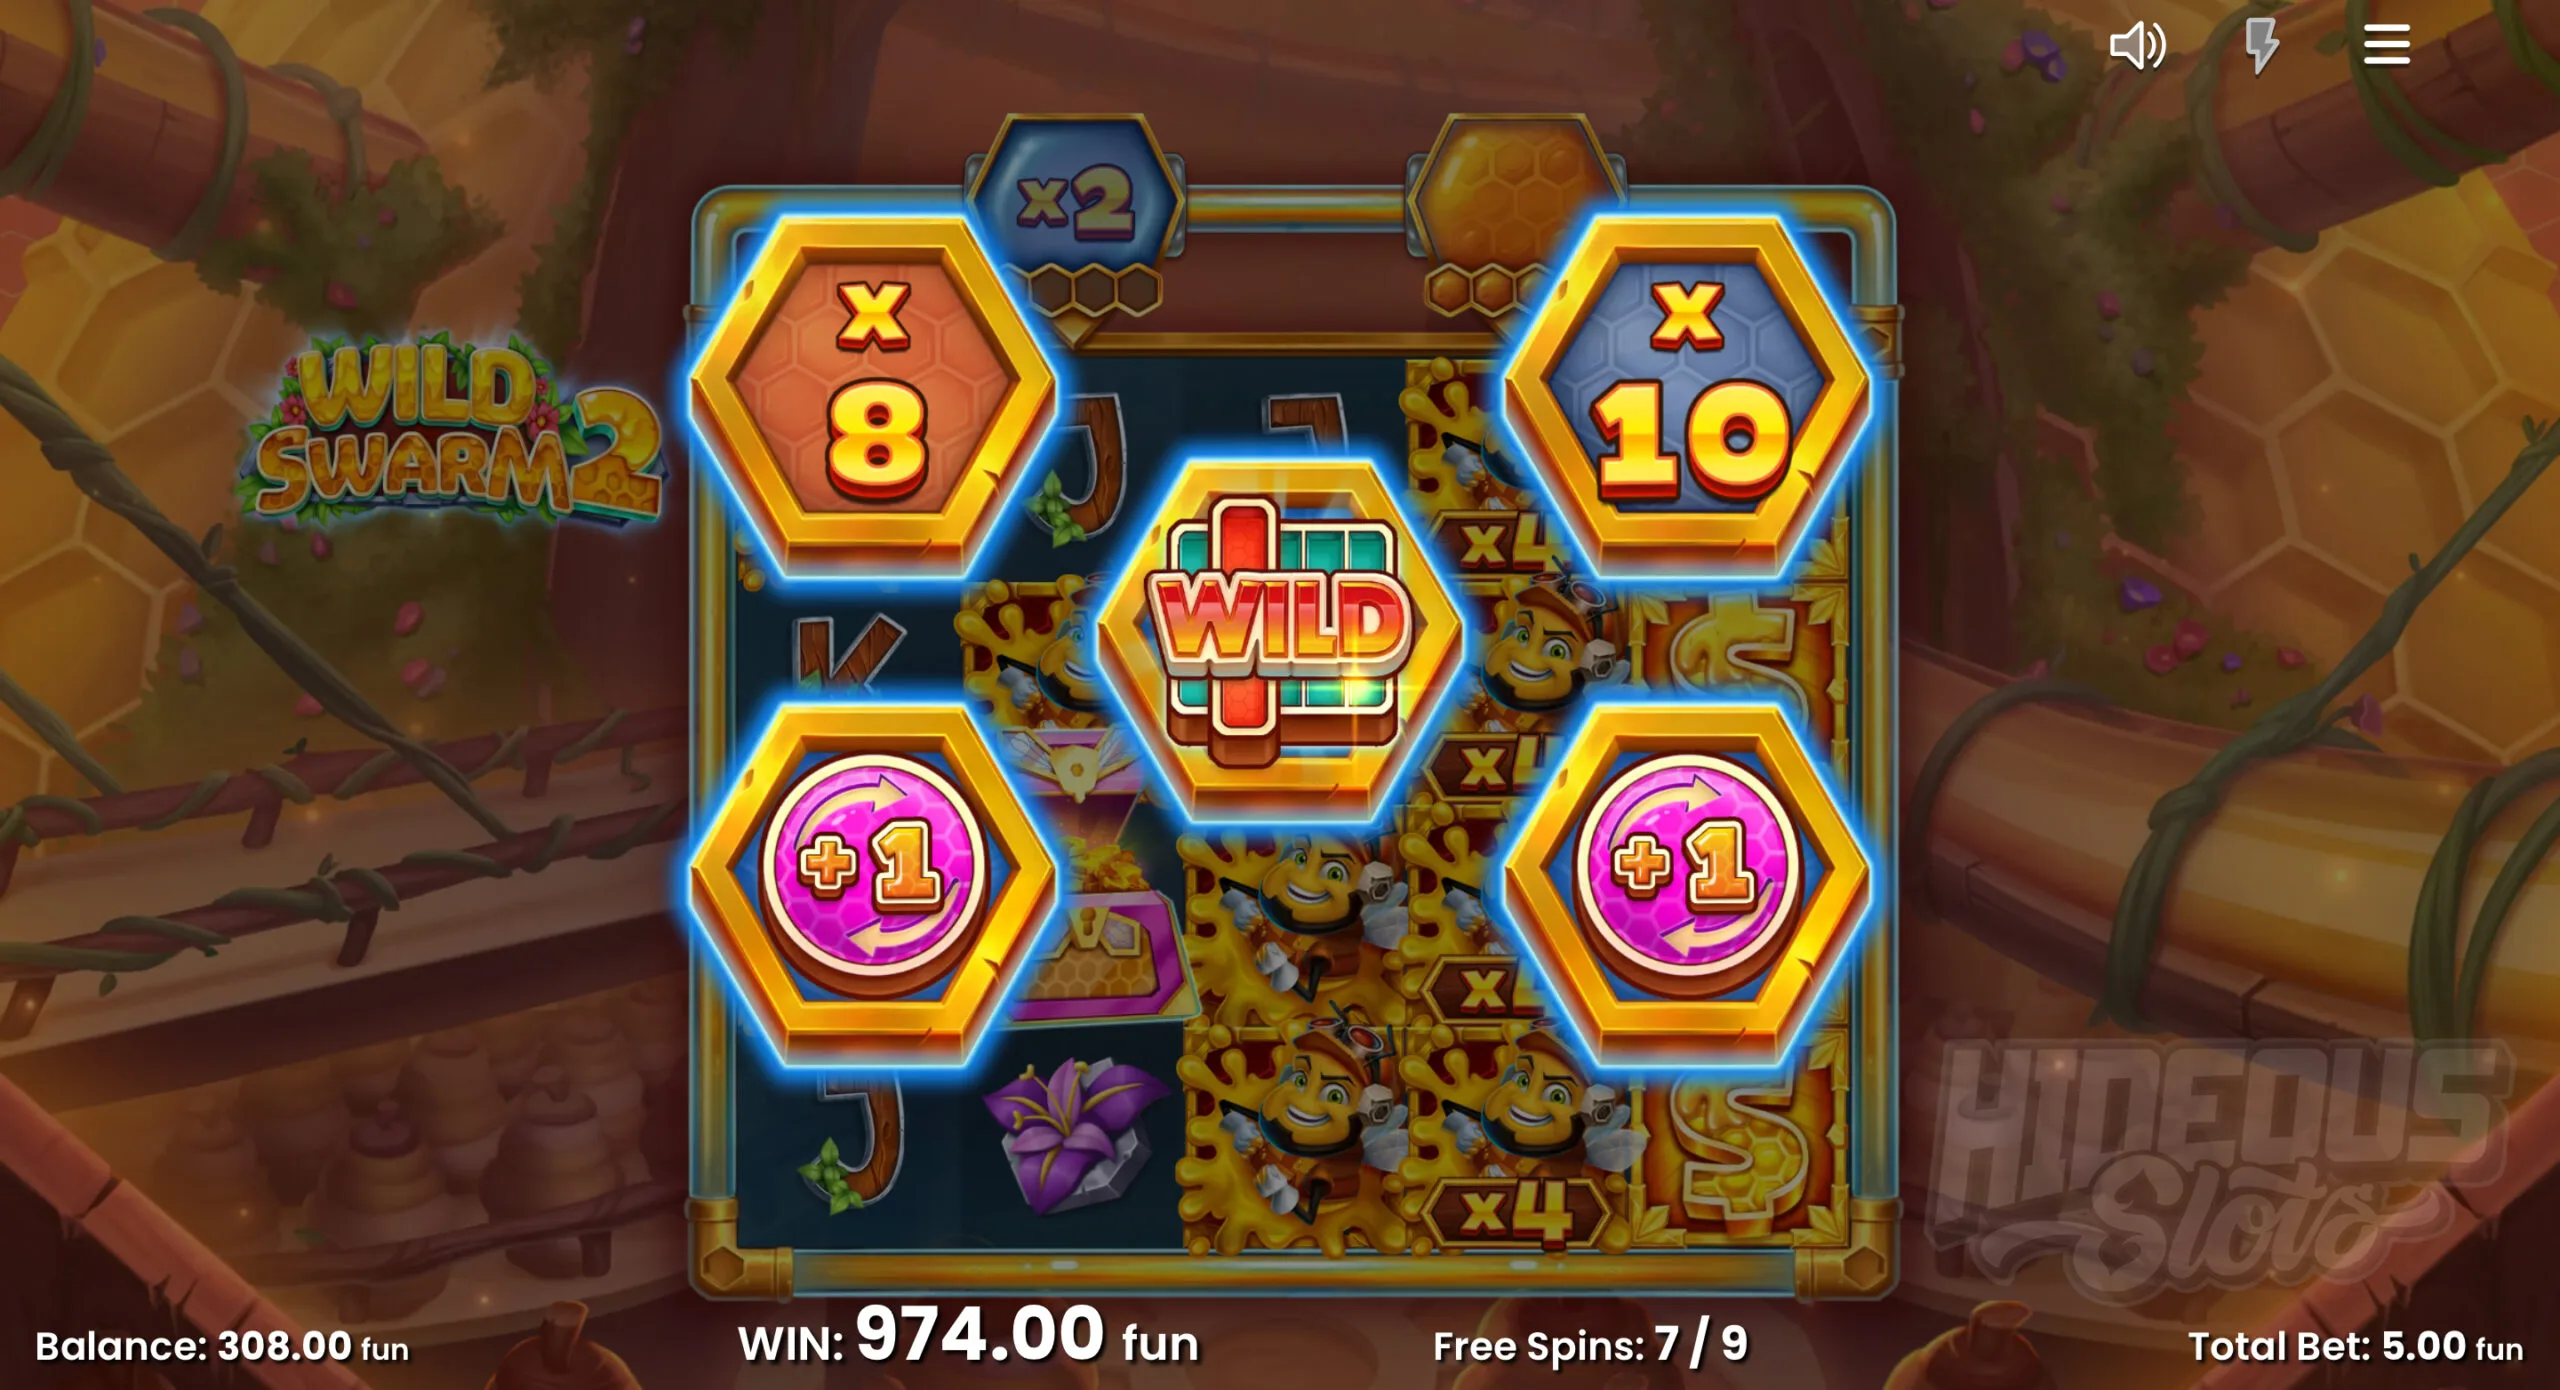 The Chest Feature Can Trigger During Free Spins, Offering Different Rewards to the Base Game